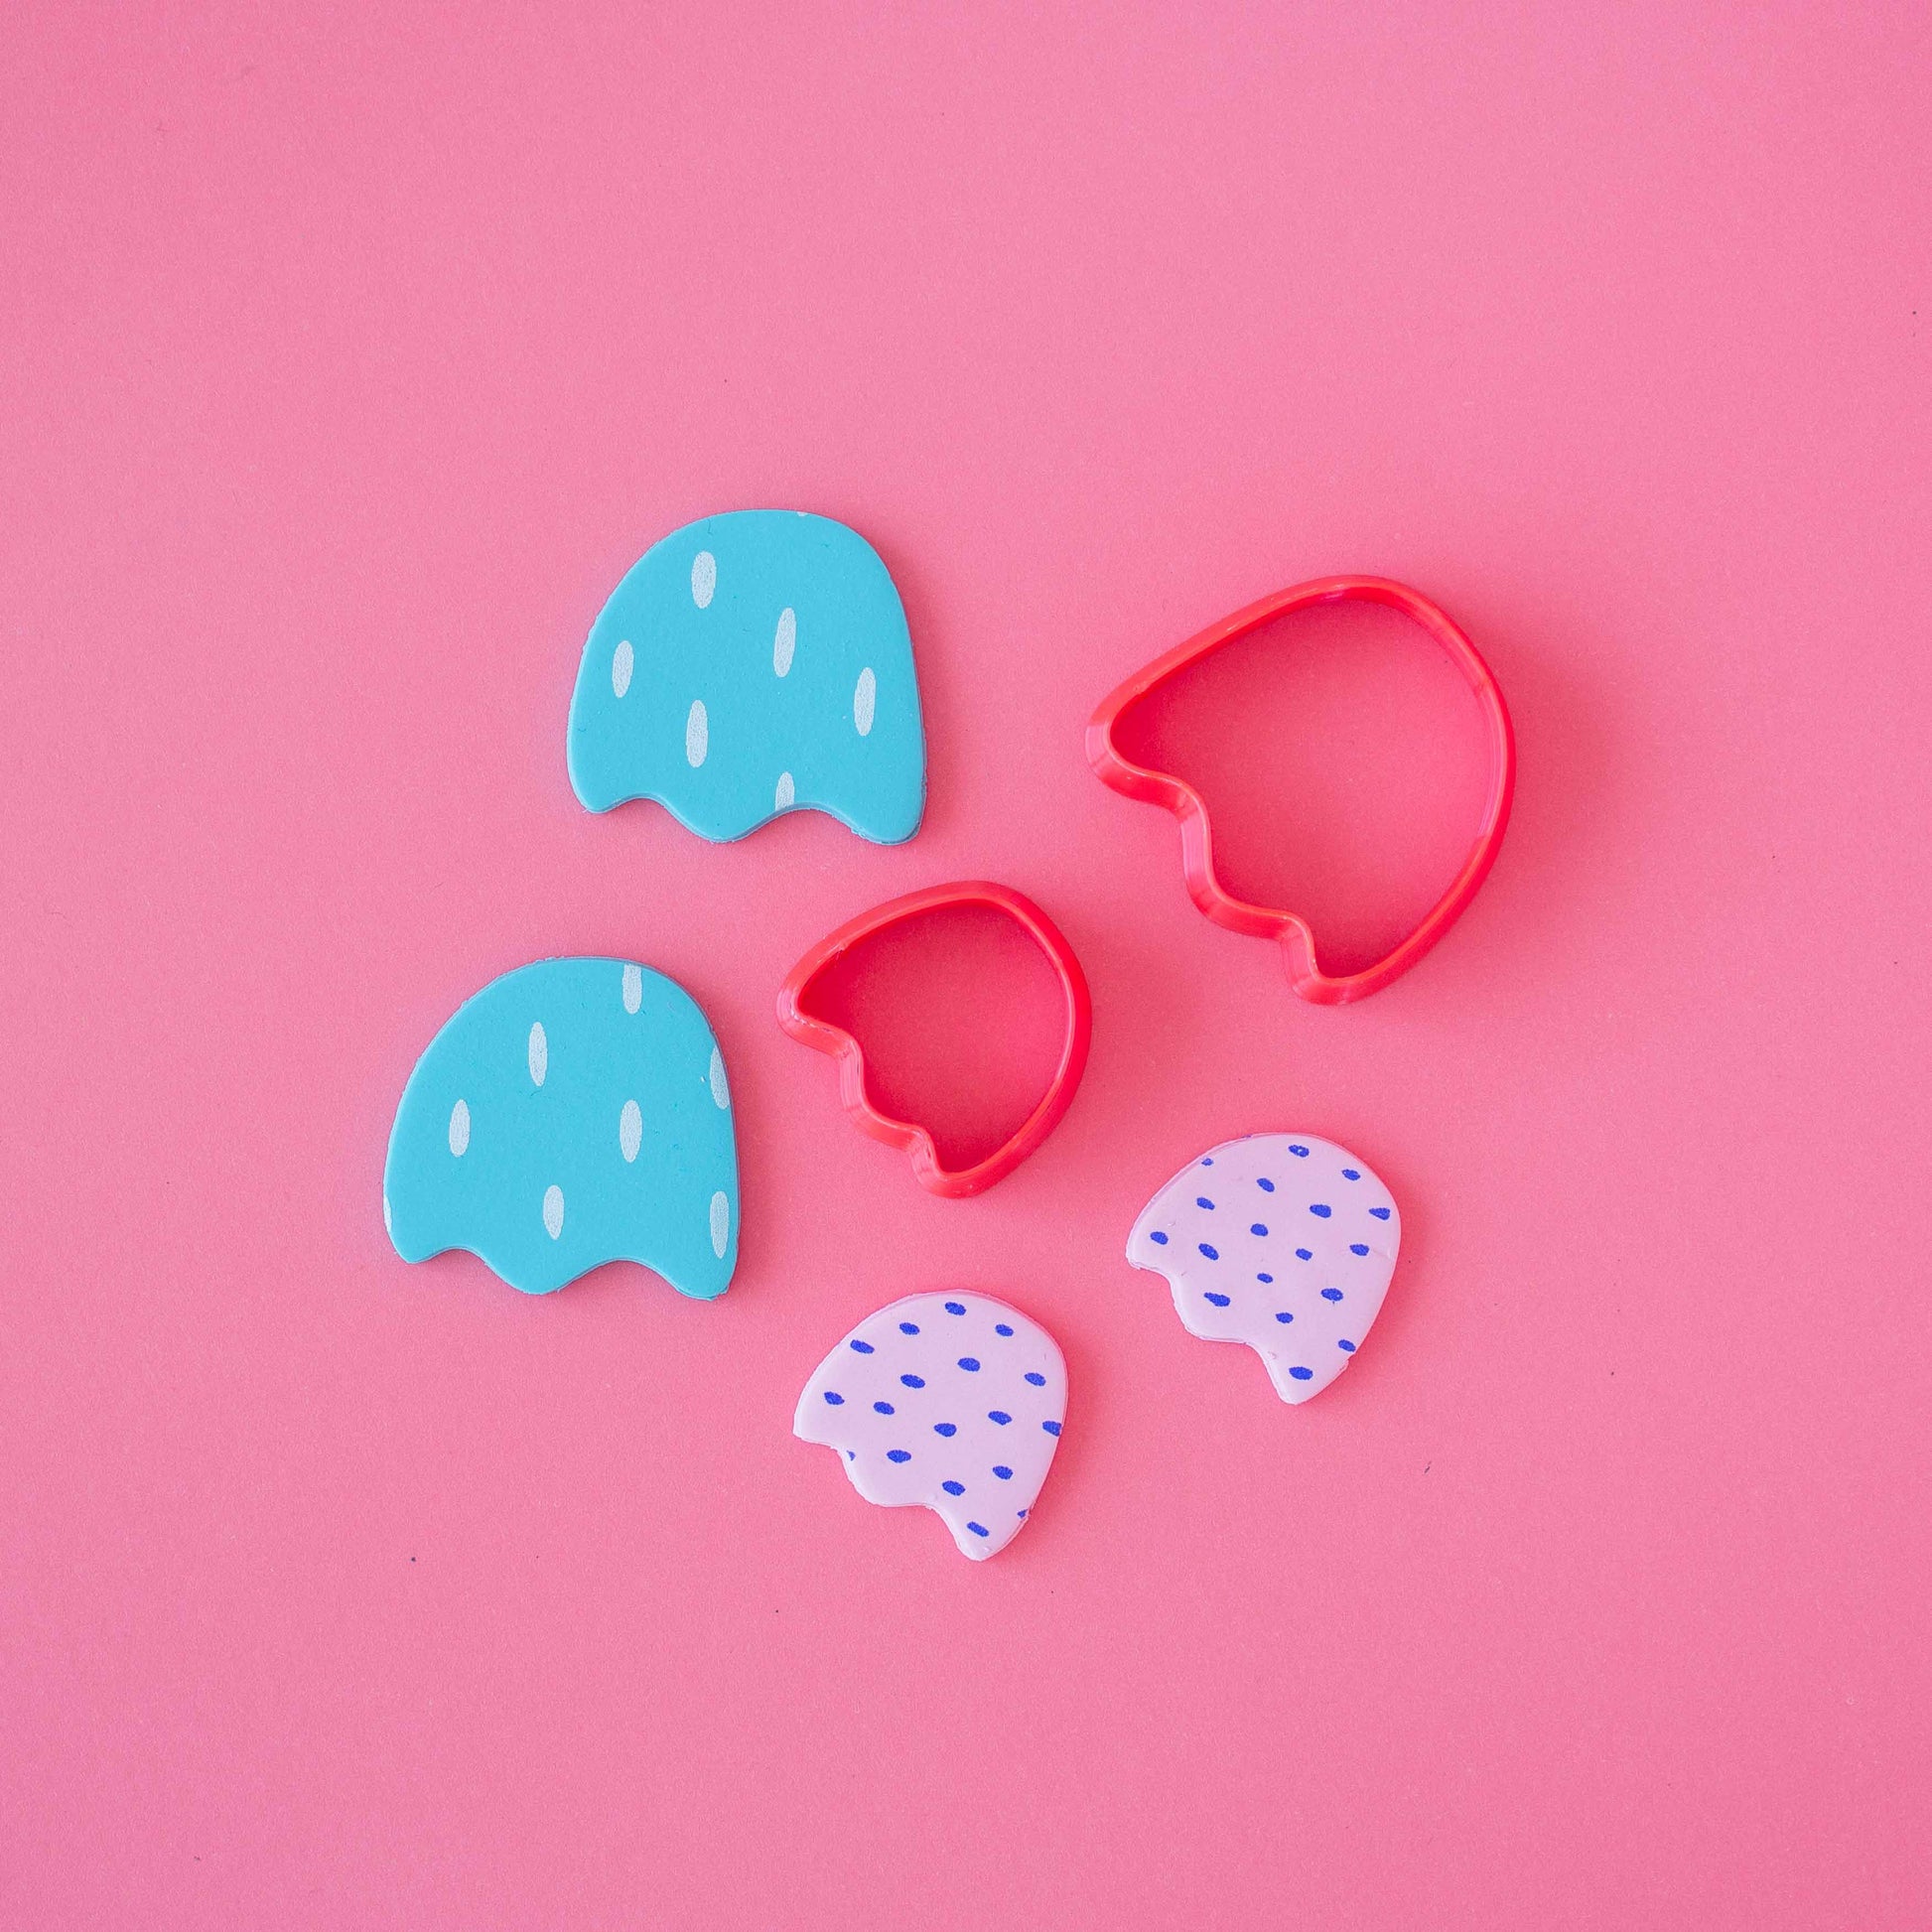 Small and big tulip polymer clay cutters surrounded by four finished pieces of tulip polymer clay earrings on a pink background.